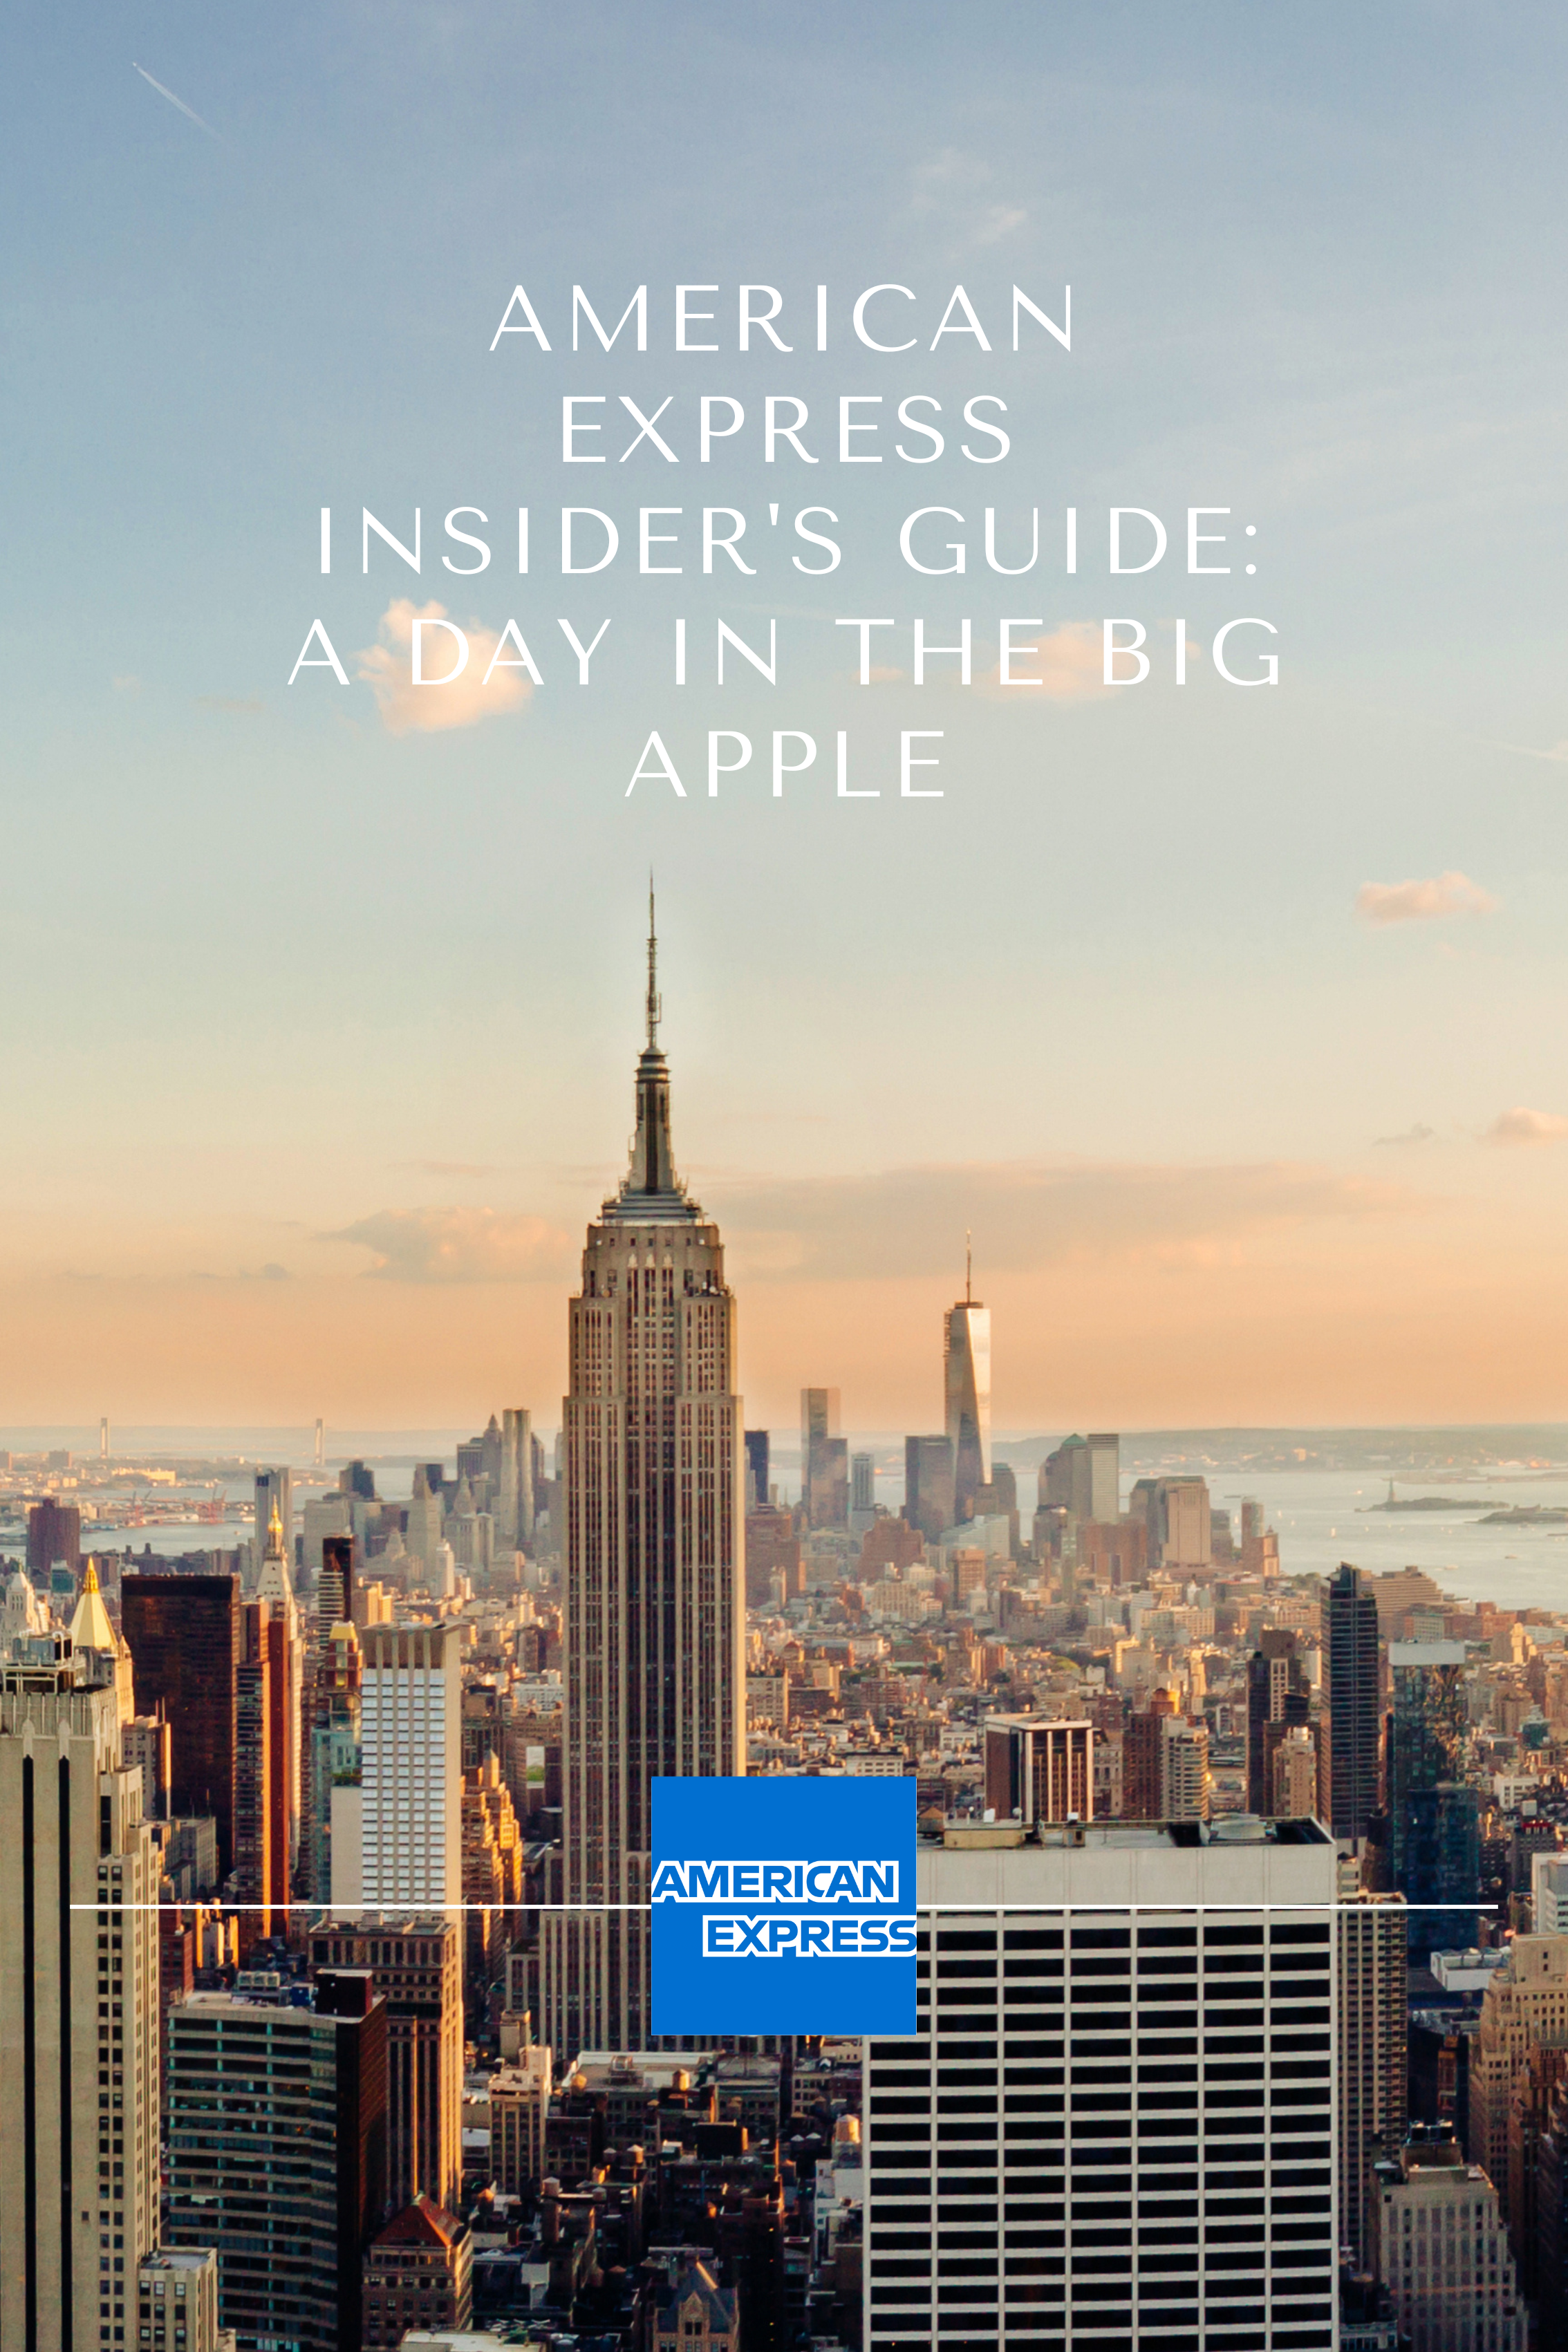 American Express Insider's Guide: A Day in the Big Apple